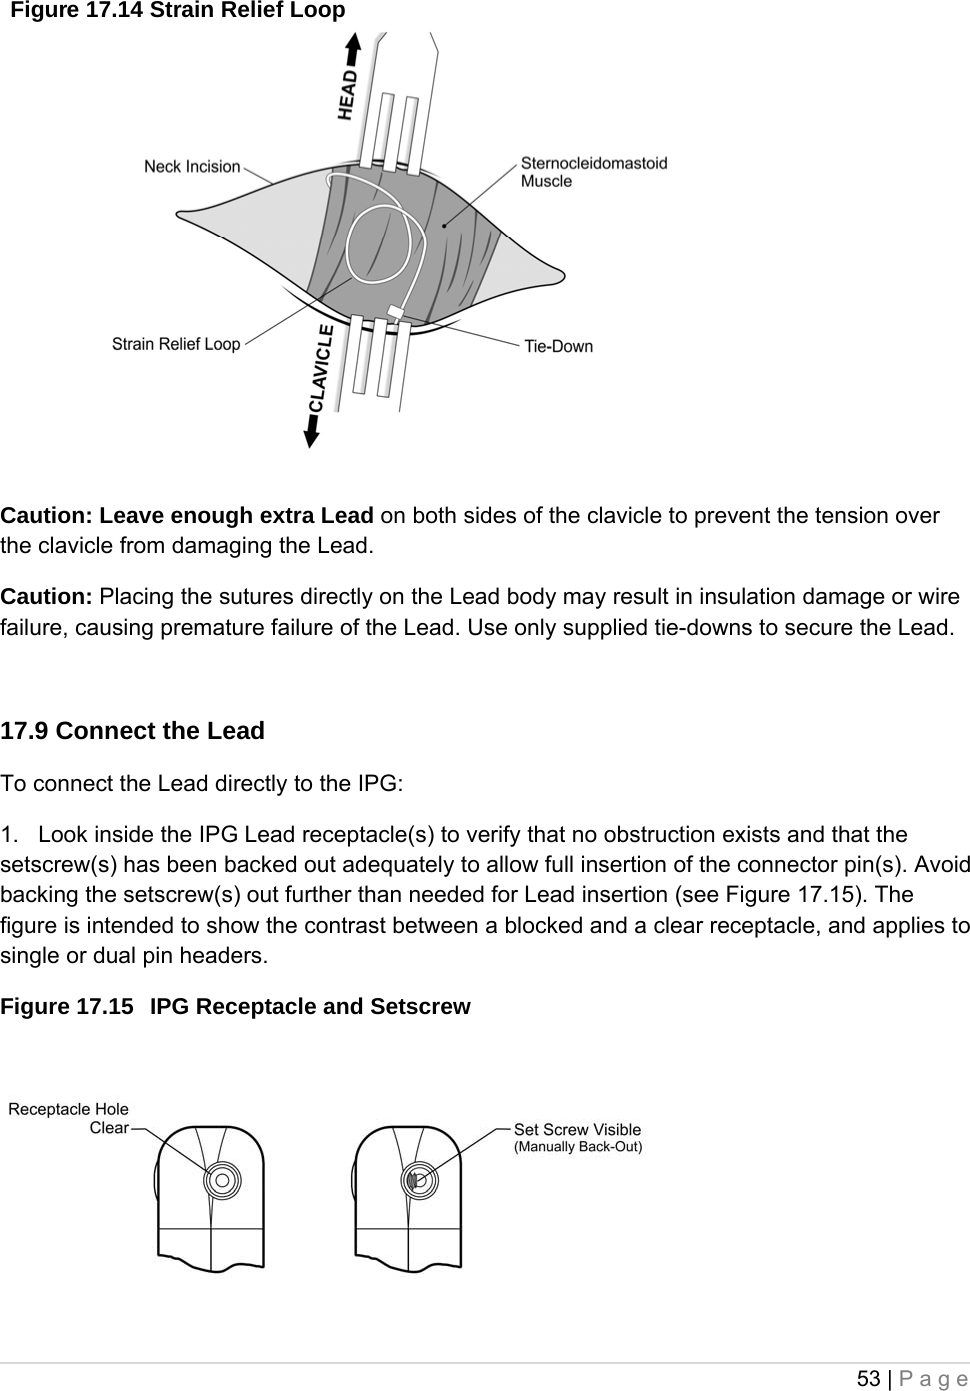 53 | Page  Figure 17.14 Strain Relief Loop   Caution: Leave enough extra Lead on both sides of the clavicle to prevent the tension over the clavicle from damaging the Lead. Caution: Placing the sutures directly on the Lead body may result in insulation damage or wire failure, causing premature failure of the Lead. Use only supplied tie-downs to secure the Lead.  17.9 Connect the Lead To connect the Lead directly to the IPG: 1.   Look inside the IPG Lead receptacle(s) to verify that no obstruction exists and that the setscrew(s) has been backed out adequately to allow full insertion of the connector pin(s). Avoid backing the setscrew(s) out further than needed for Lead insertion (see Figure 17.15). The figure is intended to show the contrast between a blocked and a clear receptacle, and applies to single or dual pin headers. Figure 17.15  IPG Receptacle and Setscrew    